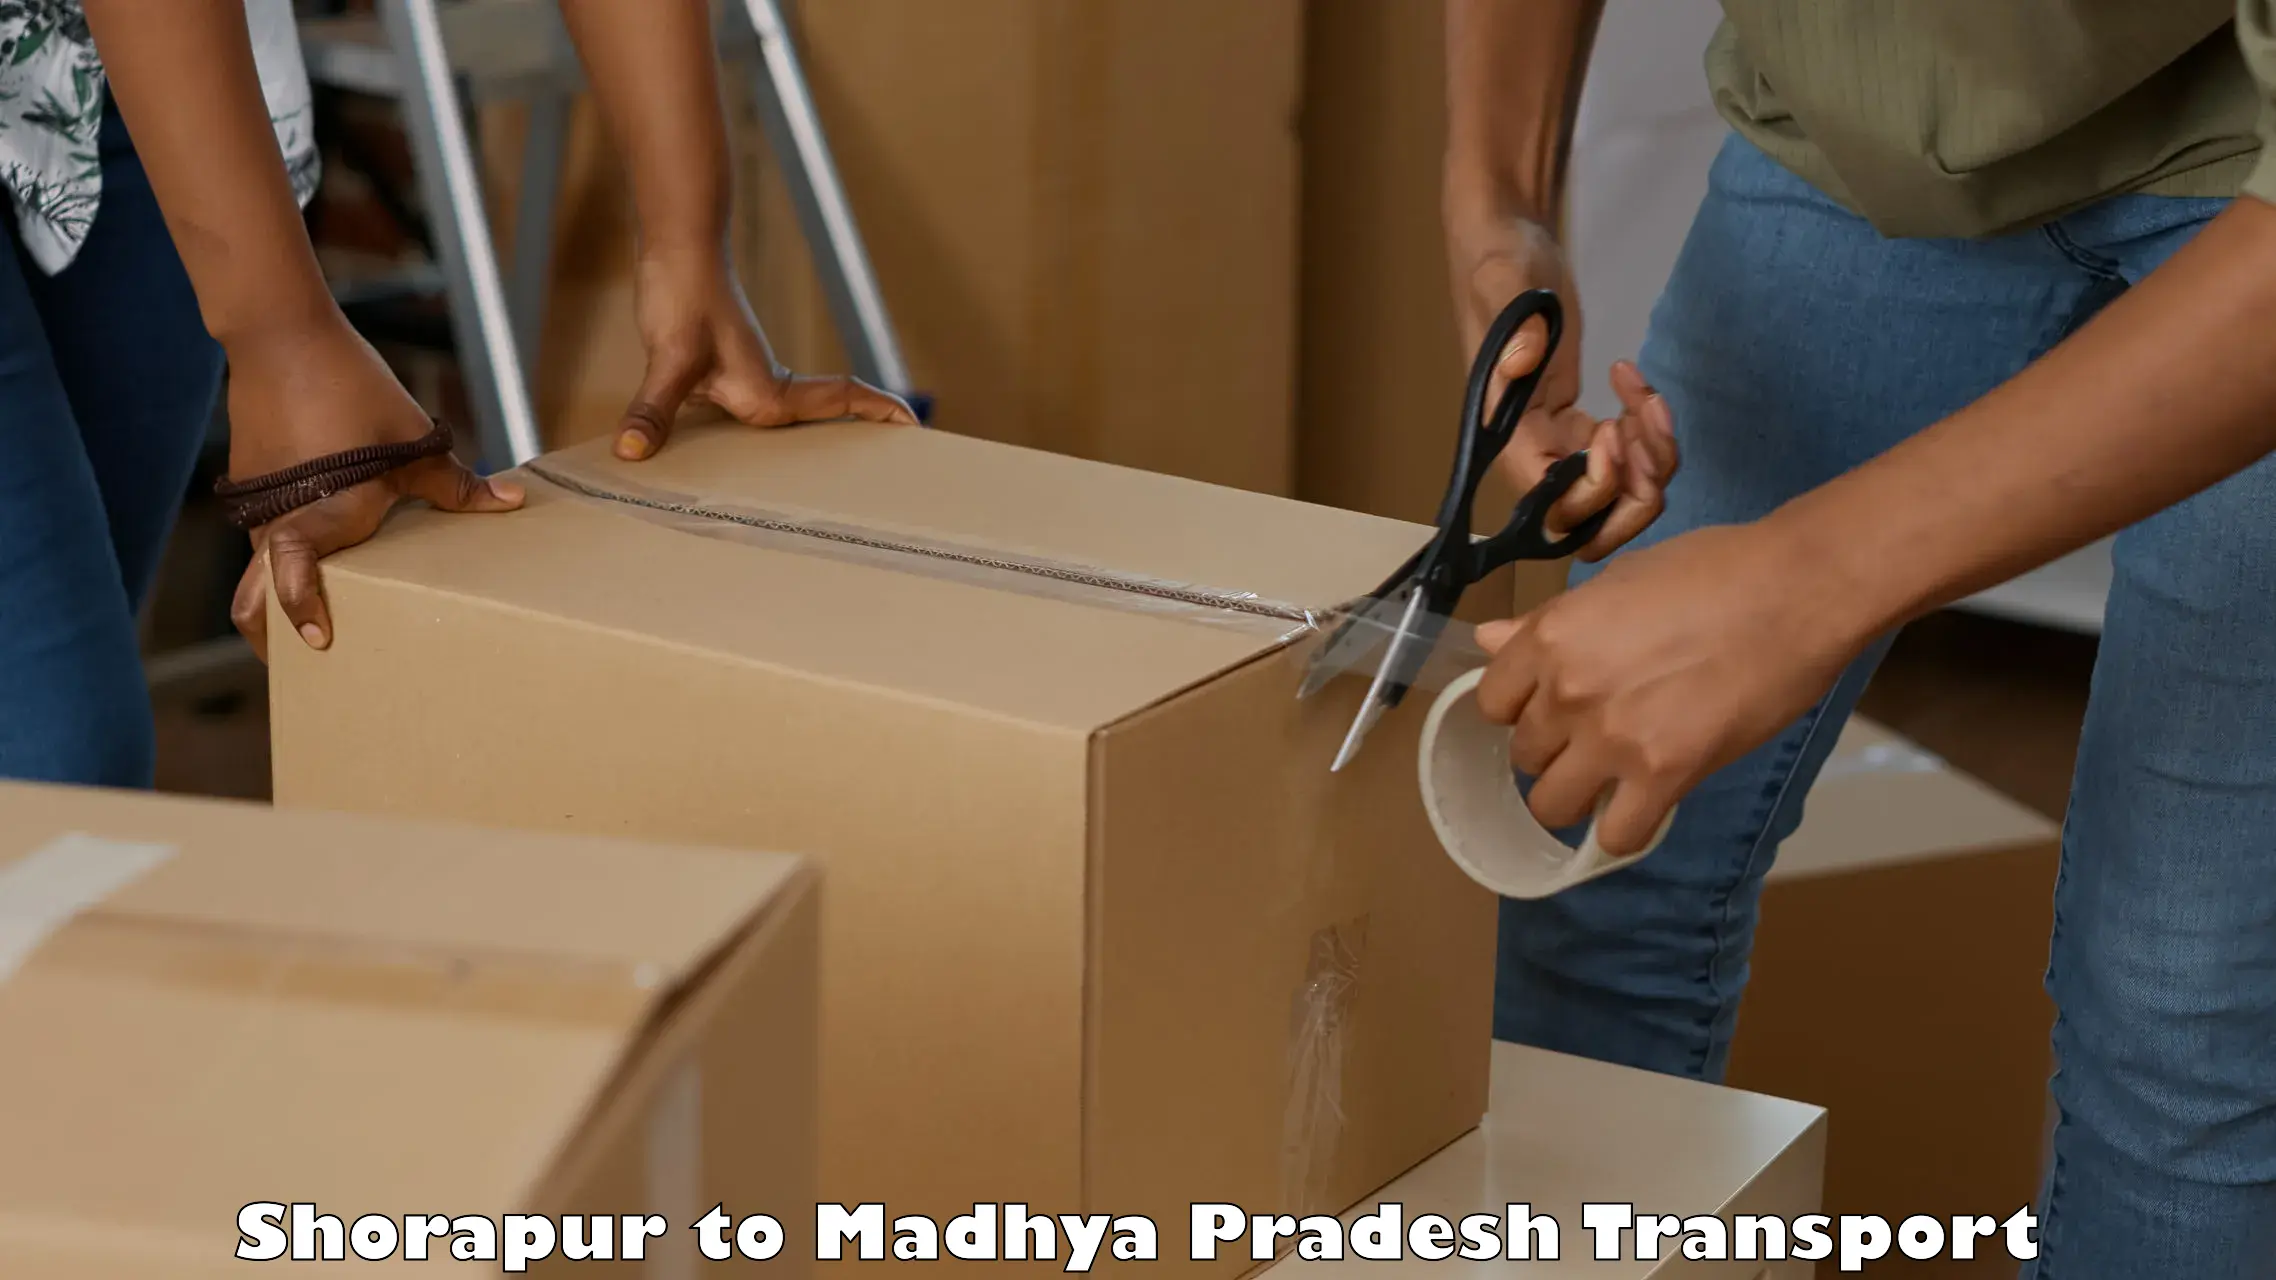 Truck transport companies in India Shorapur to Ghugri